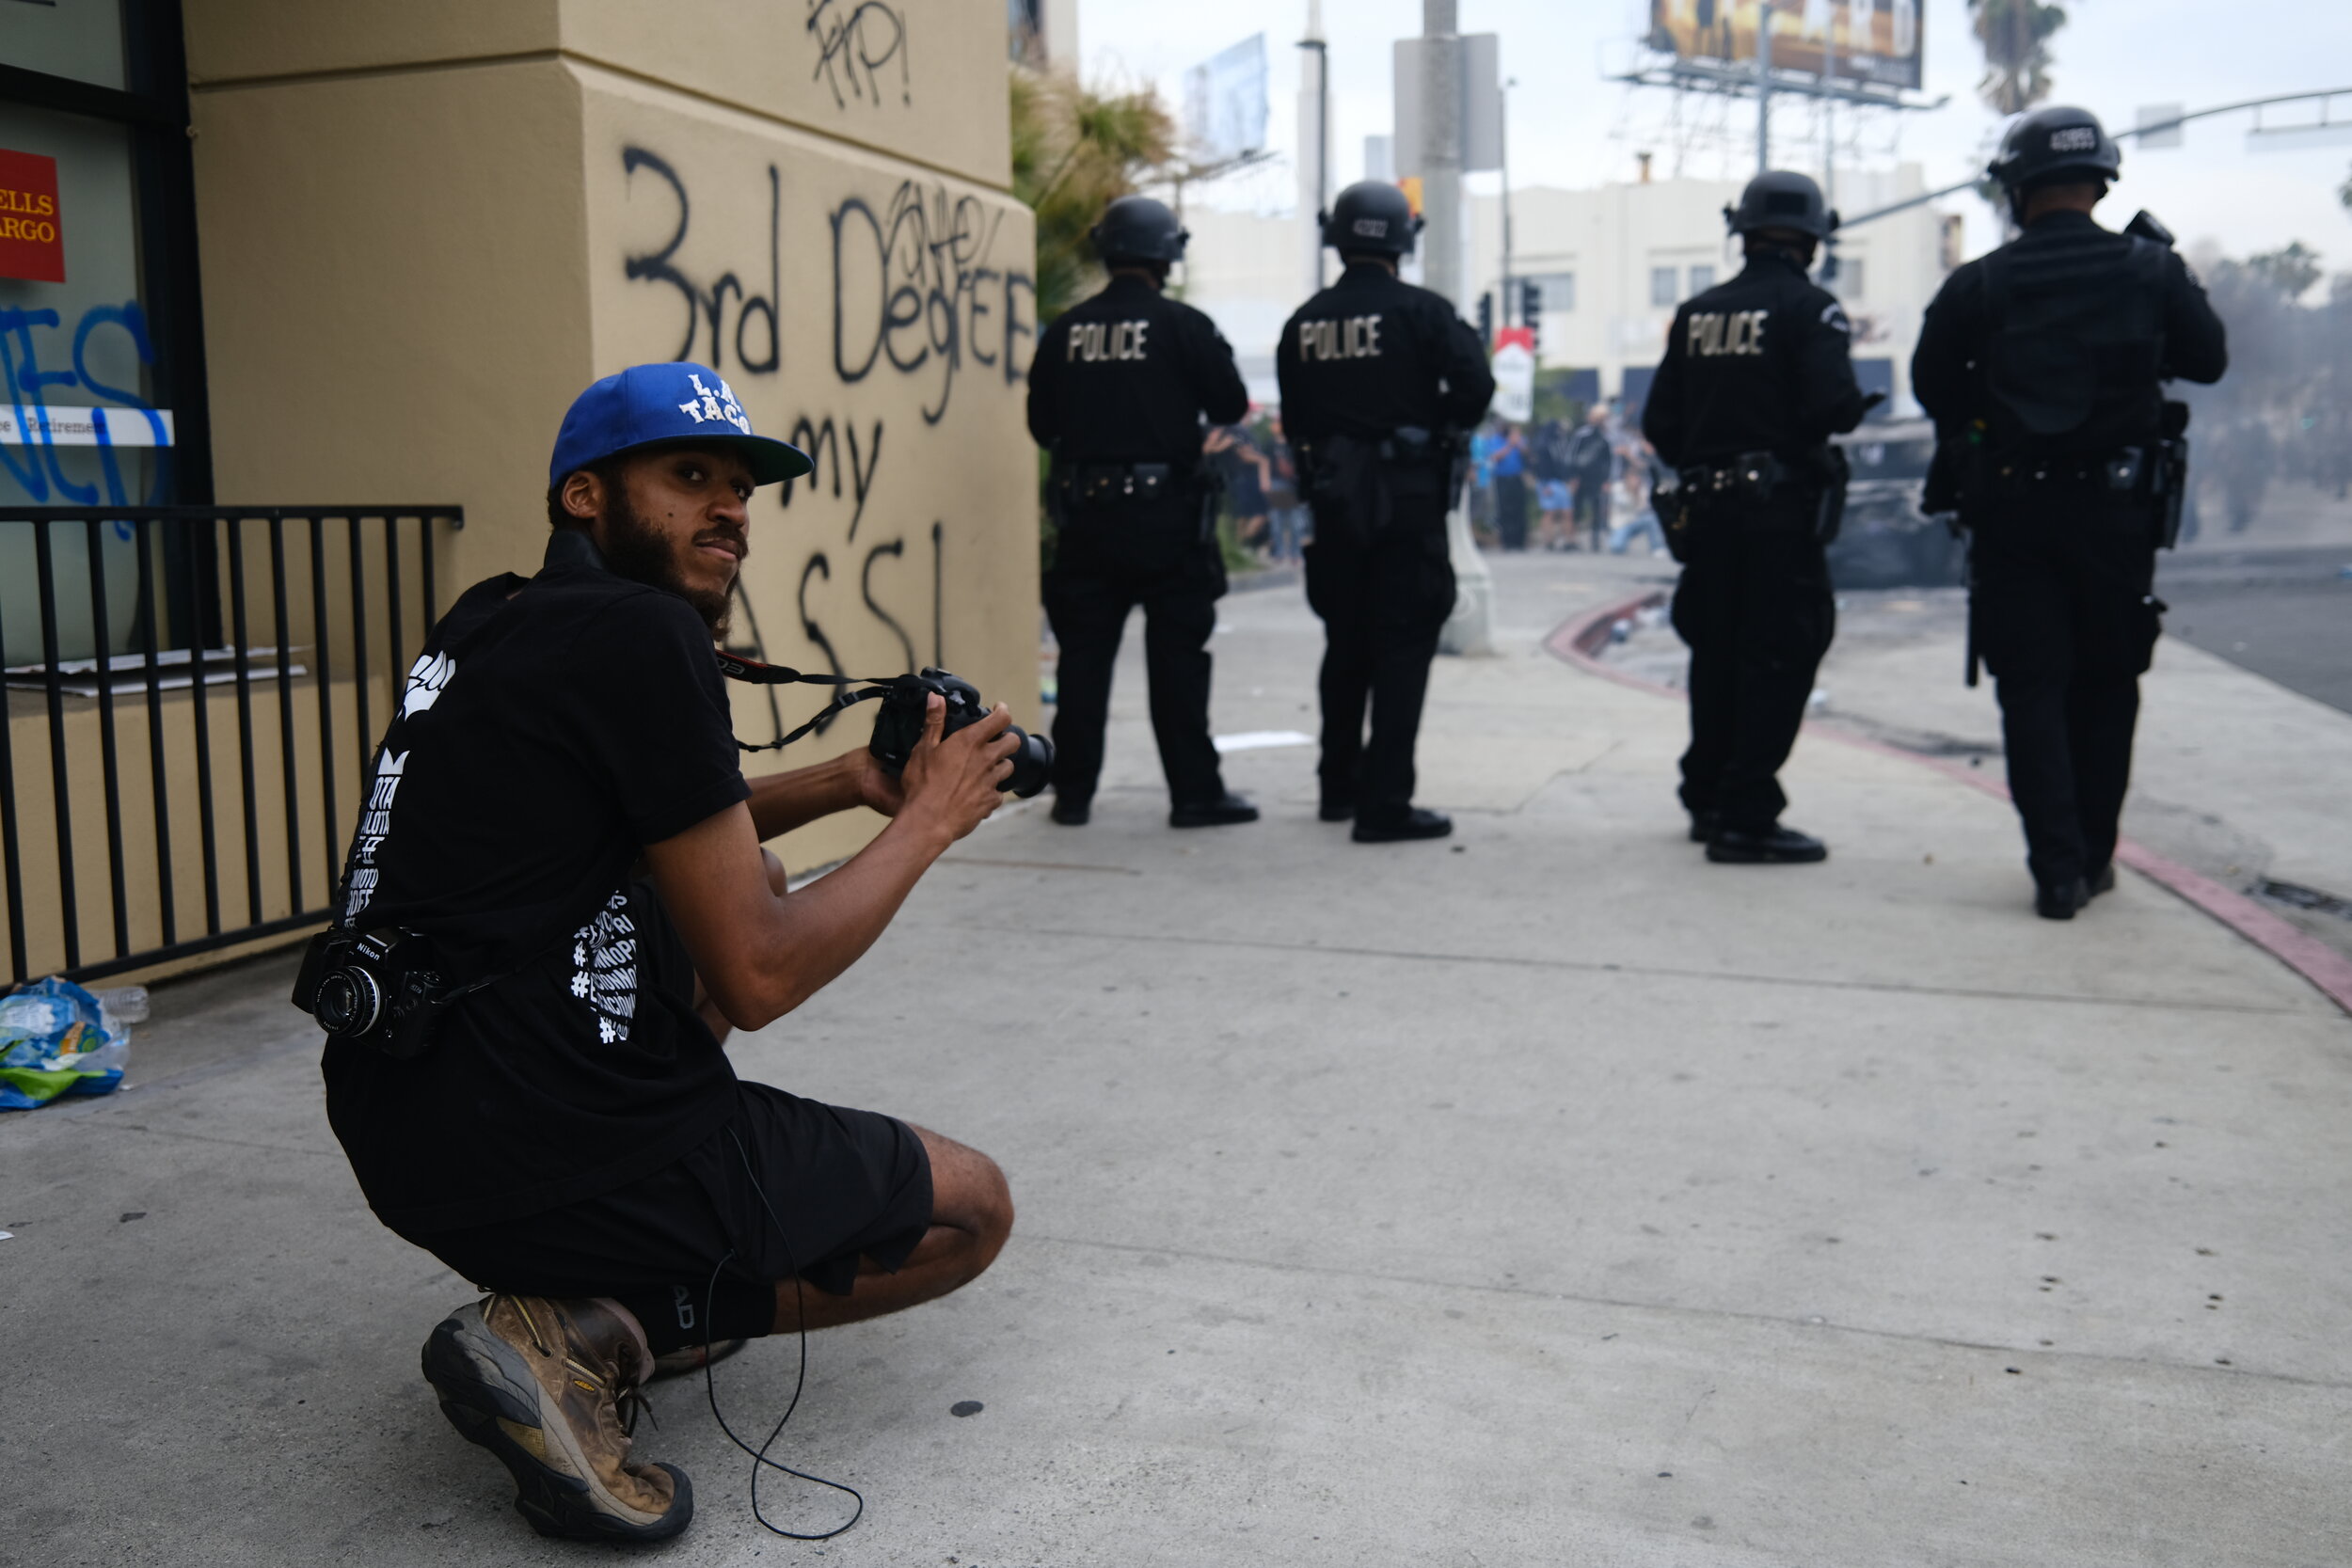 Lexis-Olivier Ray reports at a Black Lives Matter protest on May 30, 2020 in Los Angeles, CA. (Brian Feinzimer / Courtesy of Lexis-Olivier Ray)